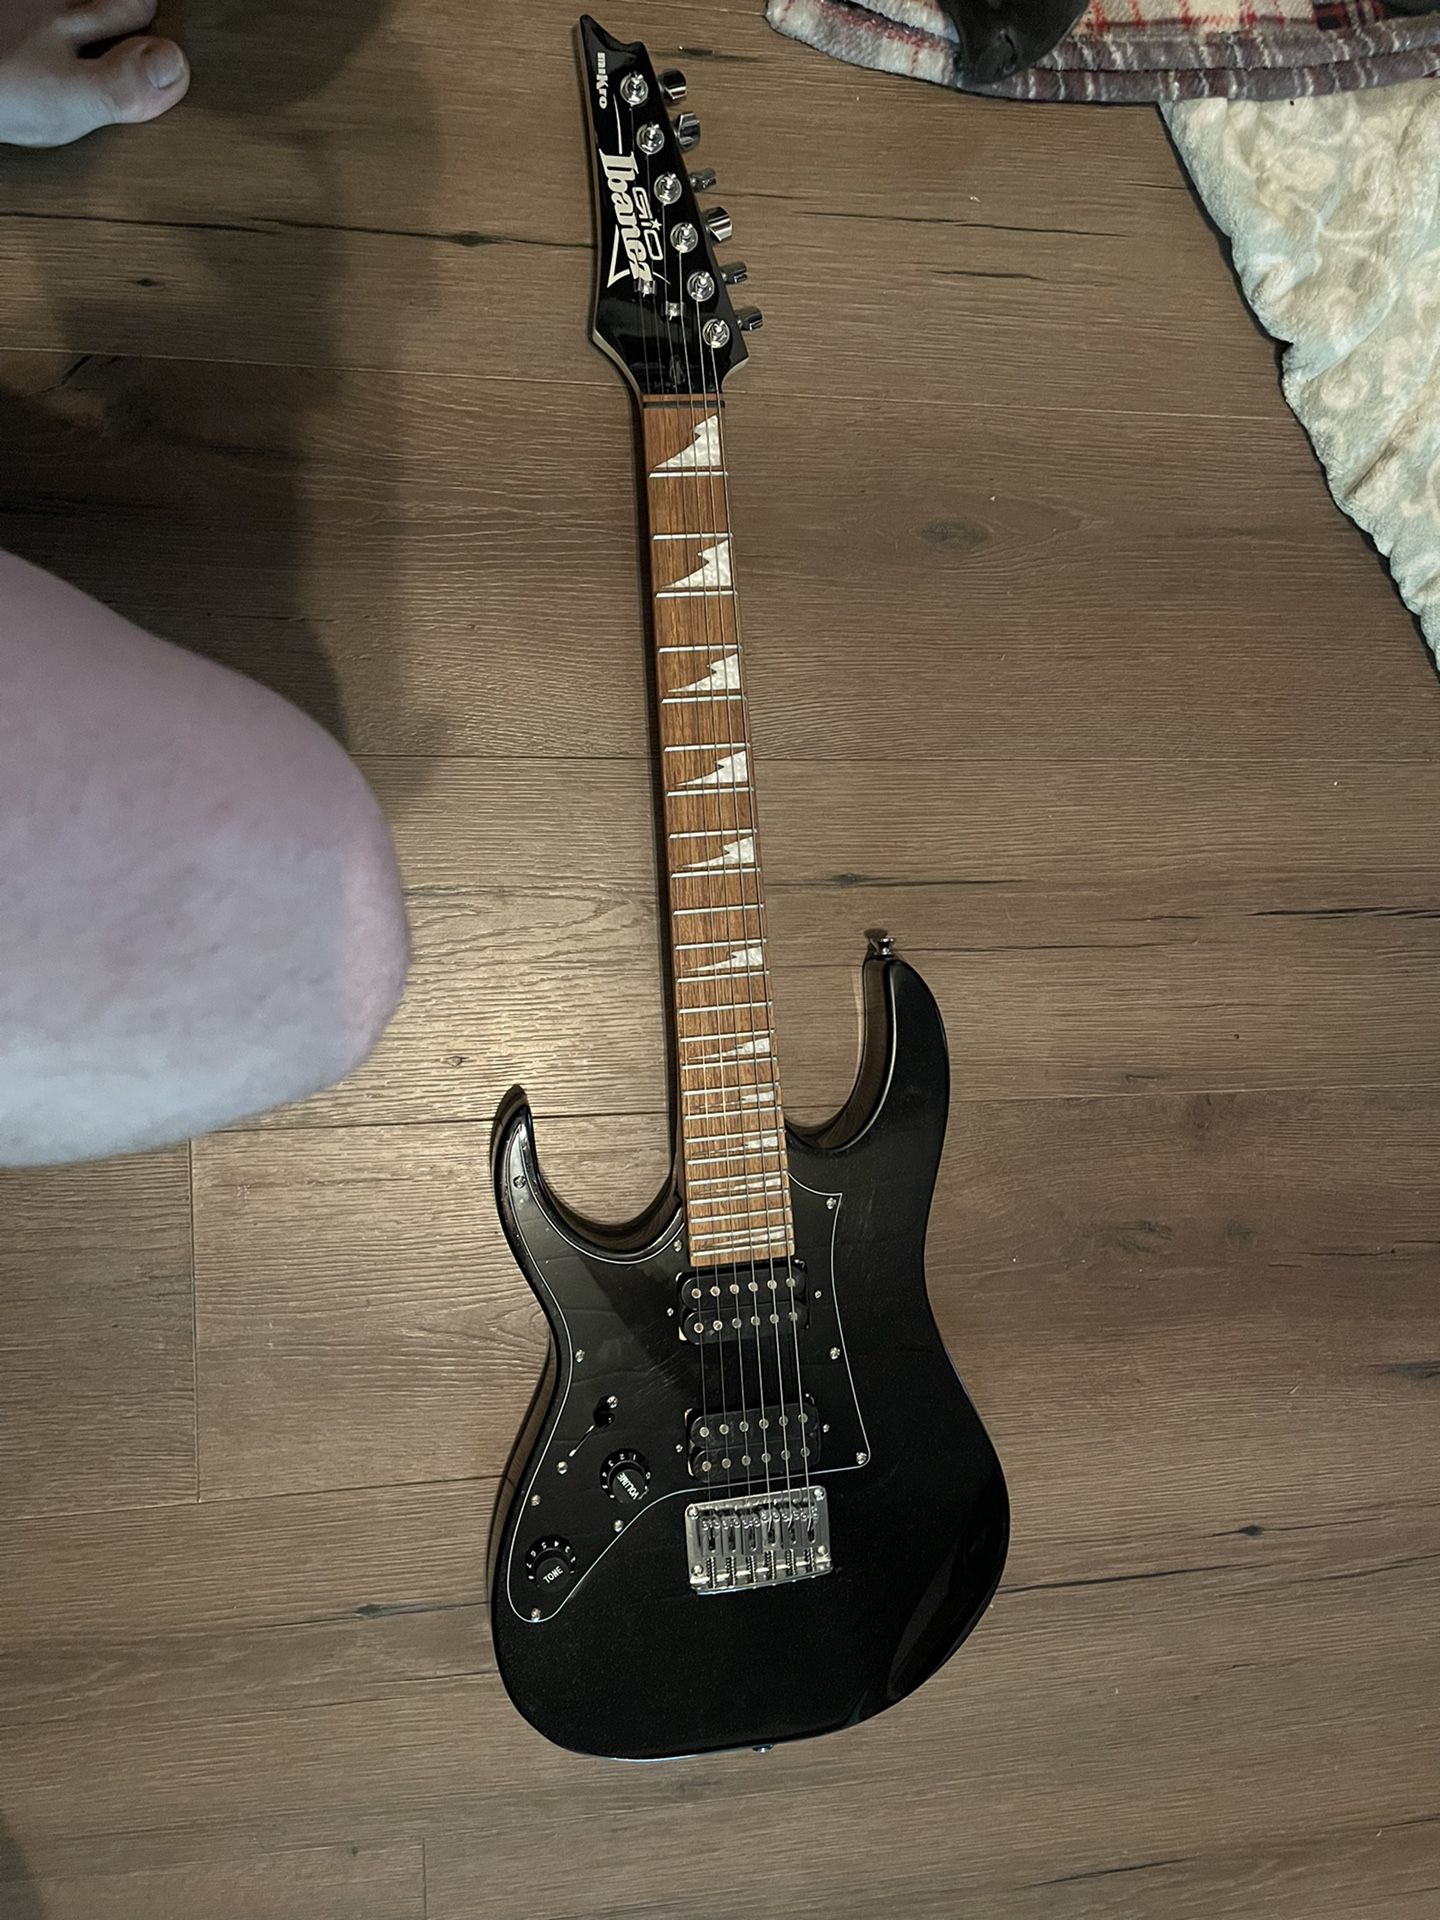 Electric Guitar IBANEZ (LEFTY) - 100$ BRAND NEW NEVER USED